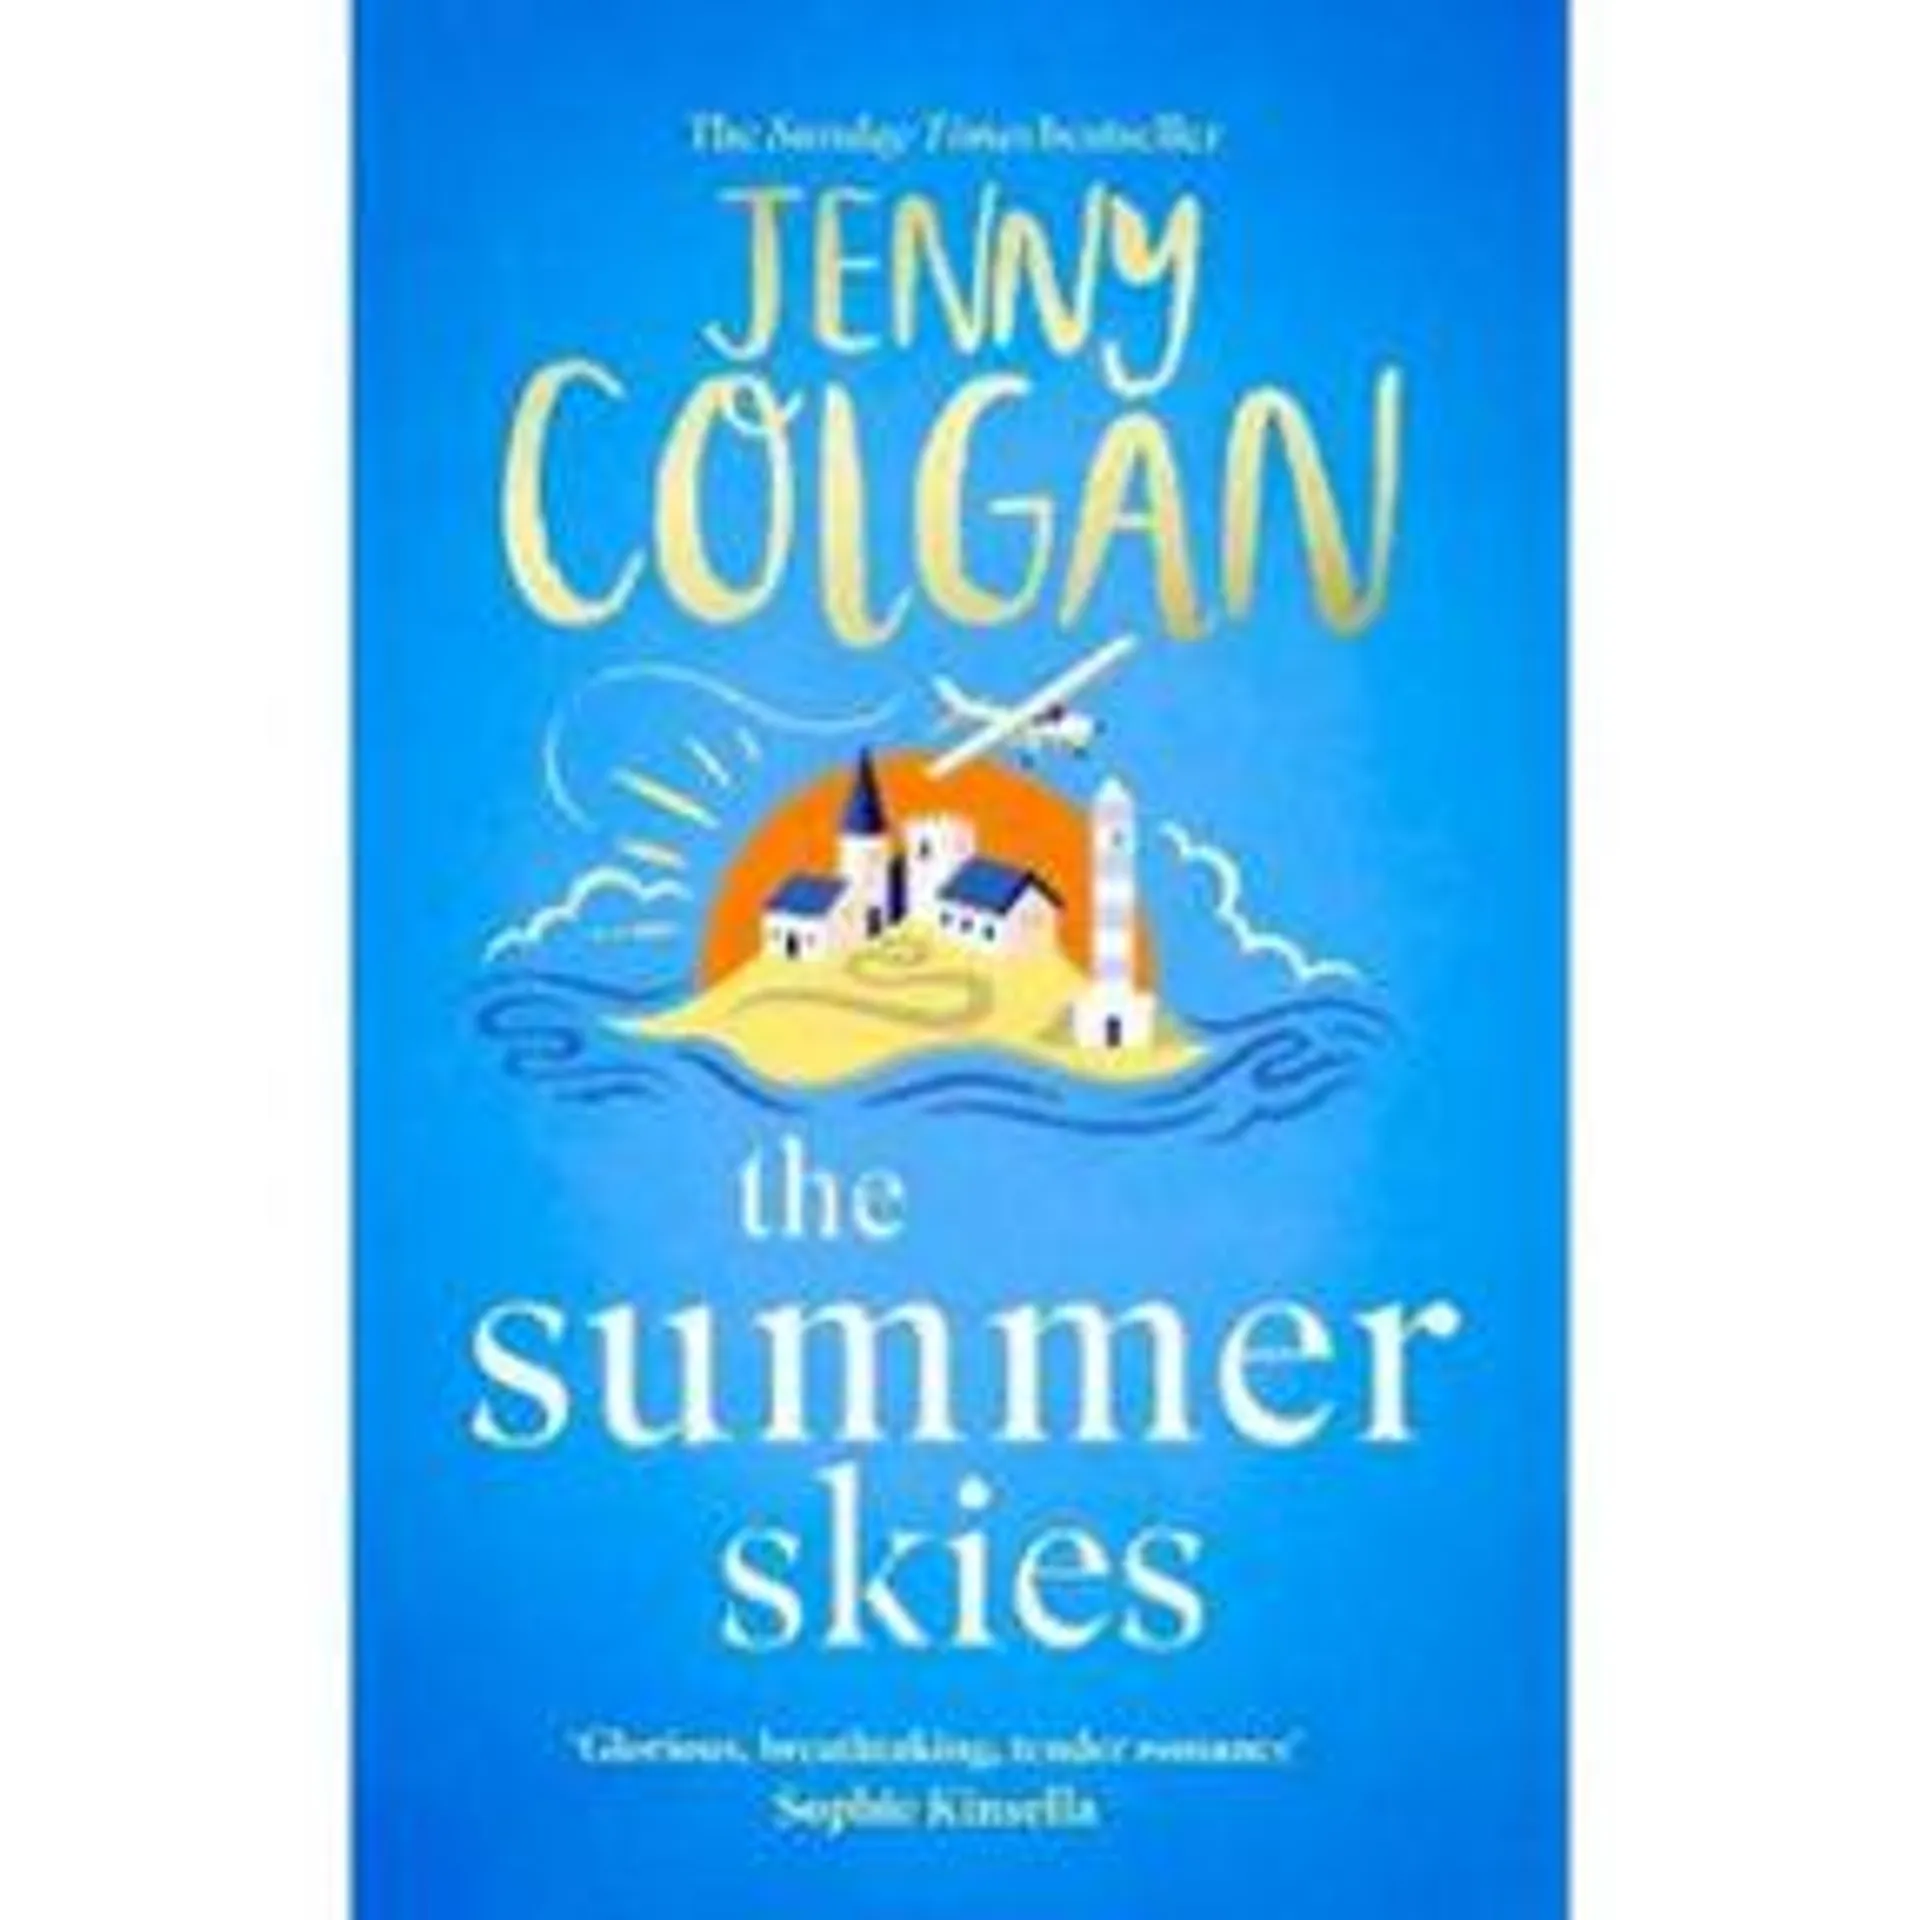 Paperback The Summer Skies by Jenny Colgan